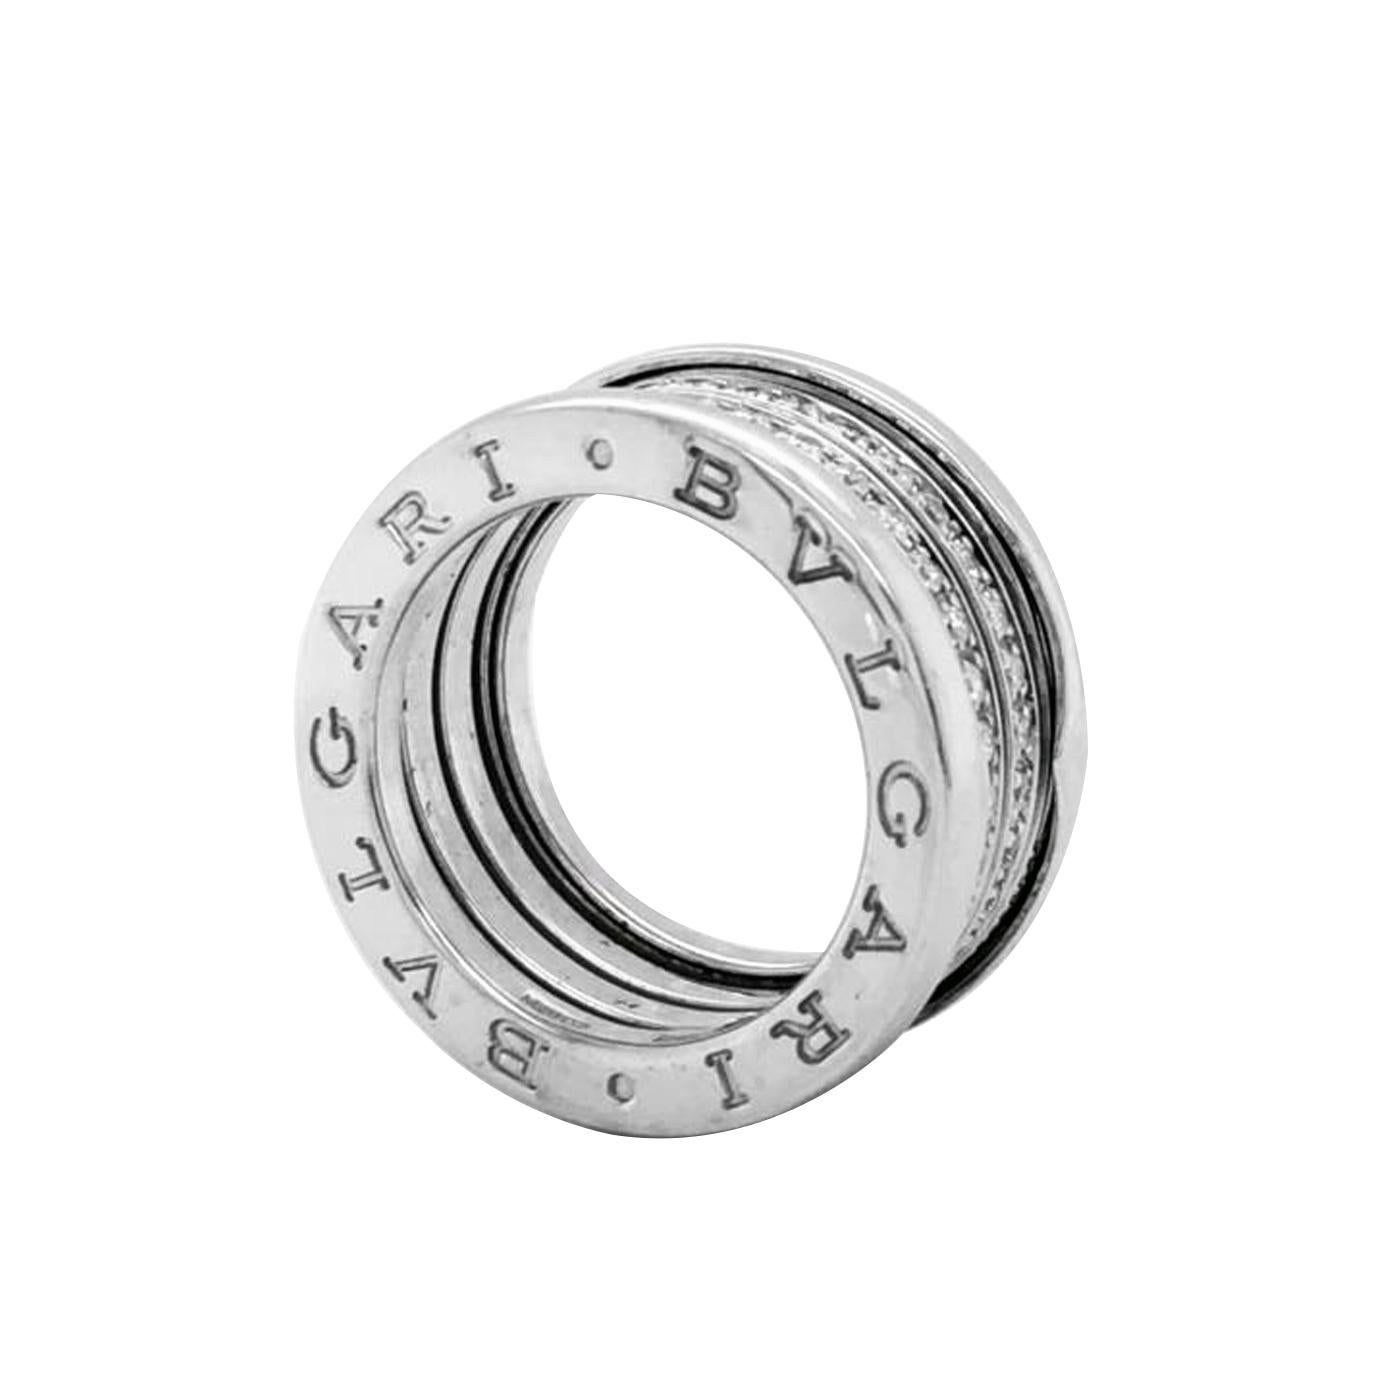 First unveiled in 1999, Bvlgari's B.zero1 ring changed the rules and standards of jewelry design thanks to its emphasis on shape and form. Taking Rome's famed Colosseum as its mold, this updated version is crafted as a single-band silhouette in